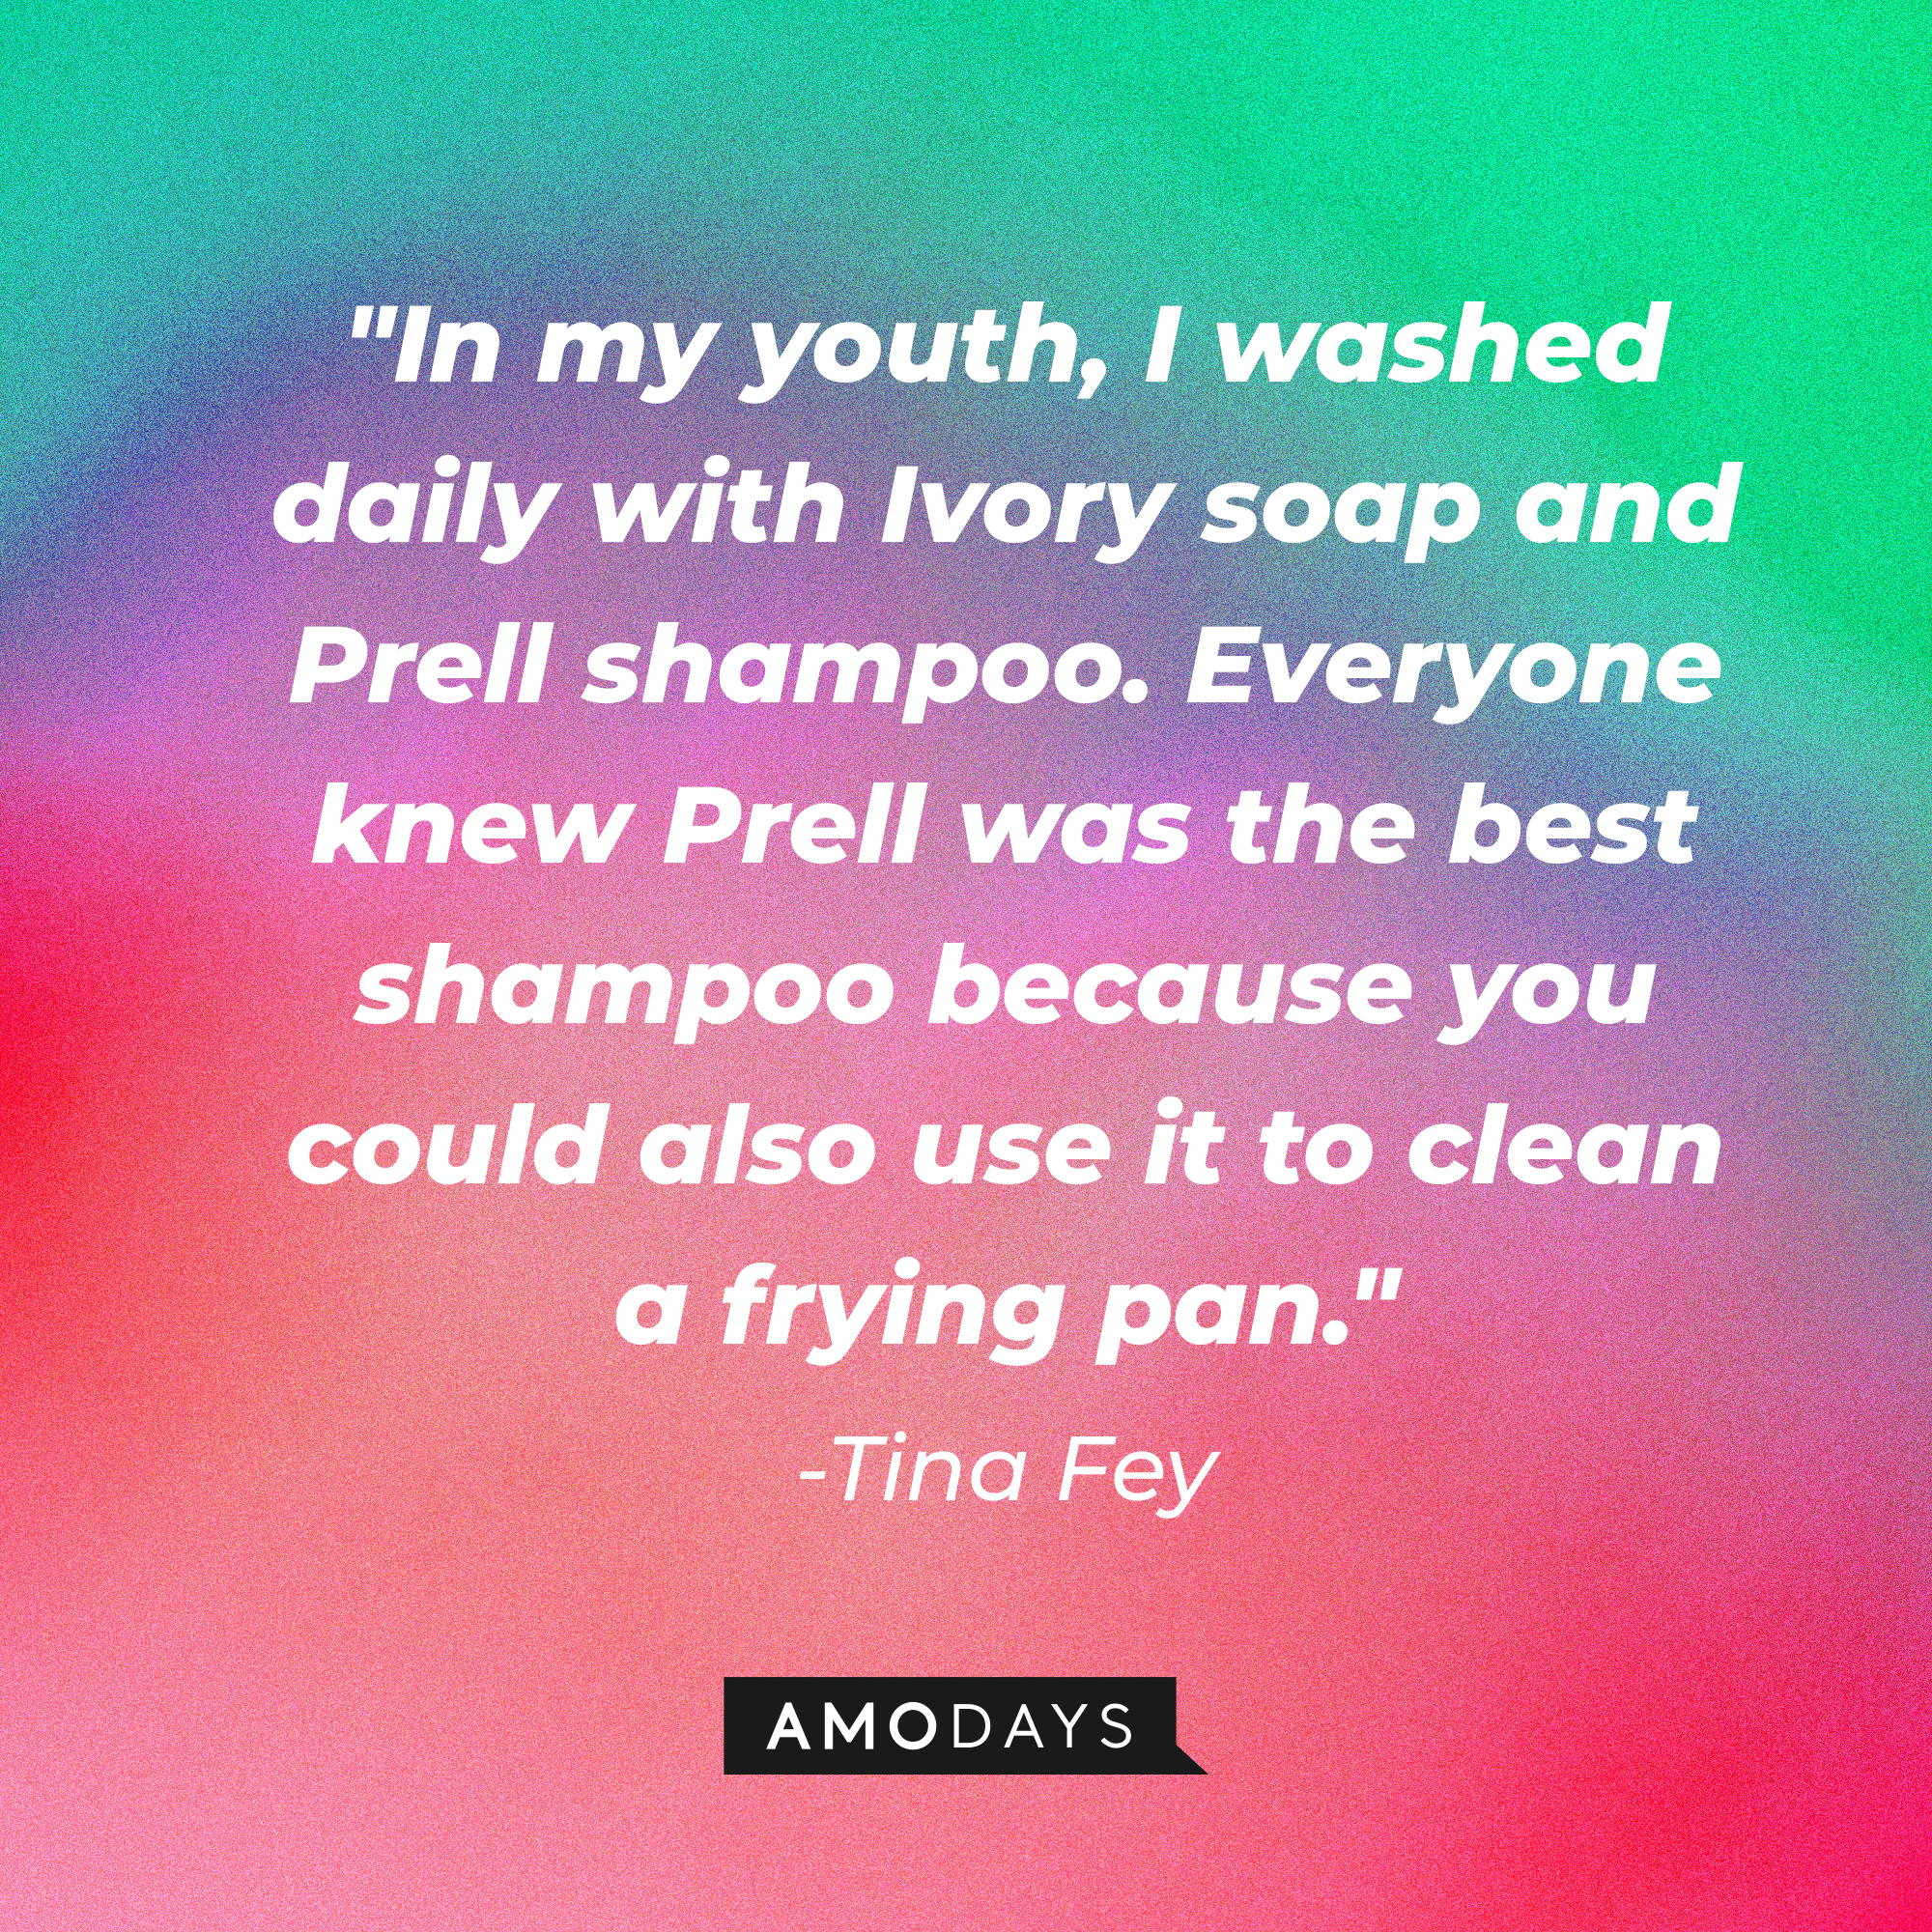 Tina Fey's quote: "In my youth, I washed daily with Ivory soap and Prell shampoo. Everyone knew Prell was the best shampoo because you could also use it to clean a frying pan."  | Source: AmoDays